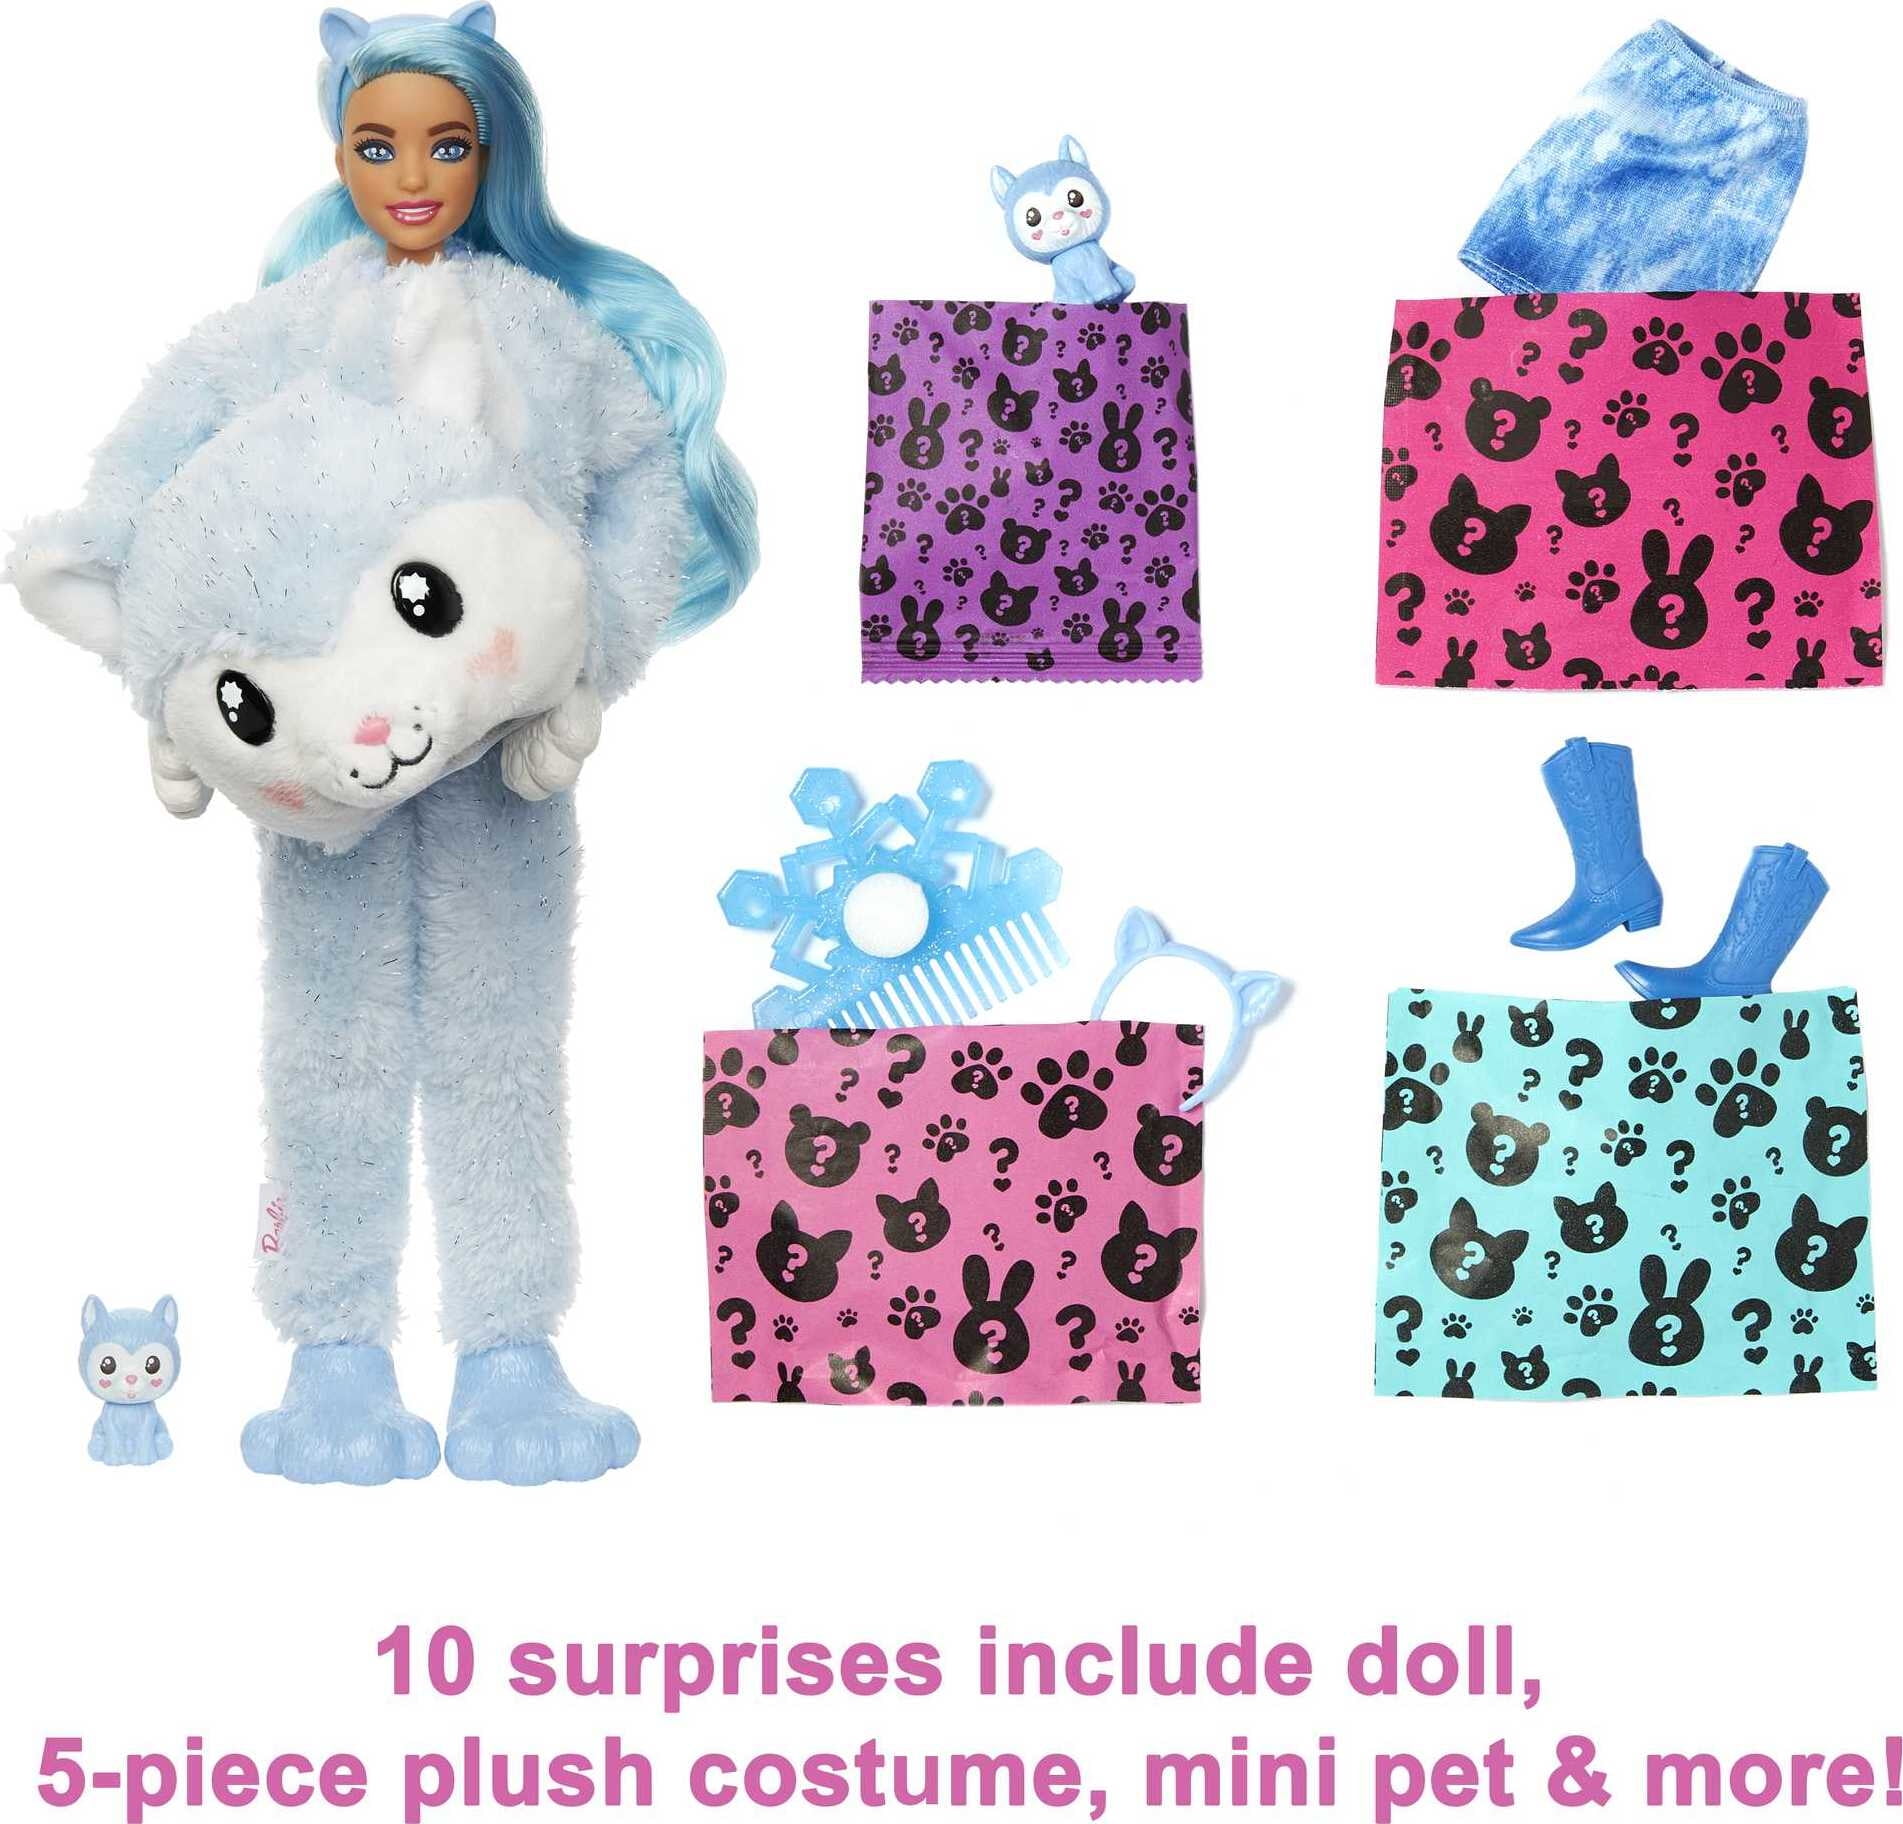 Barbie Cutie Reveal Purse Collection With 7 Surprises Including Mini Pet  (styles May Vary) : Target